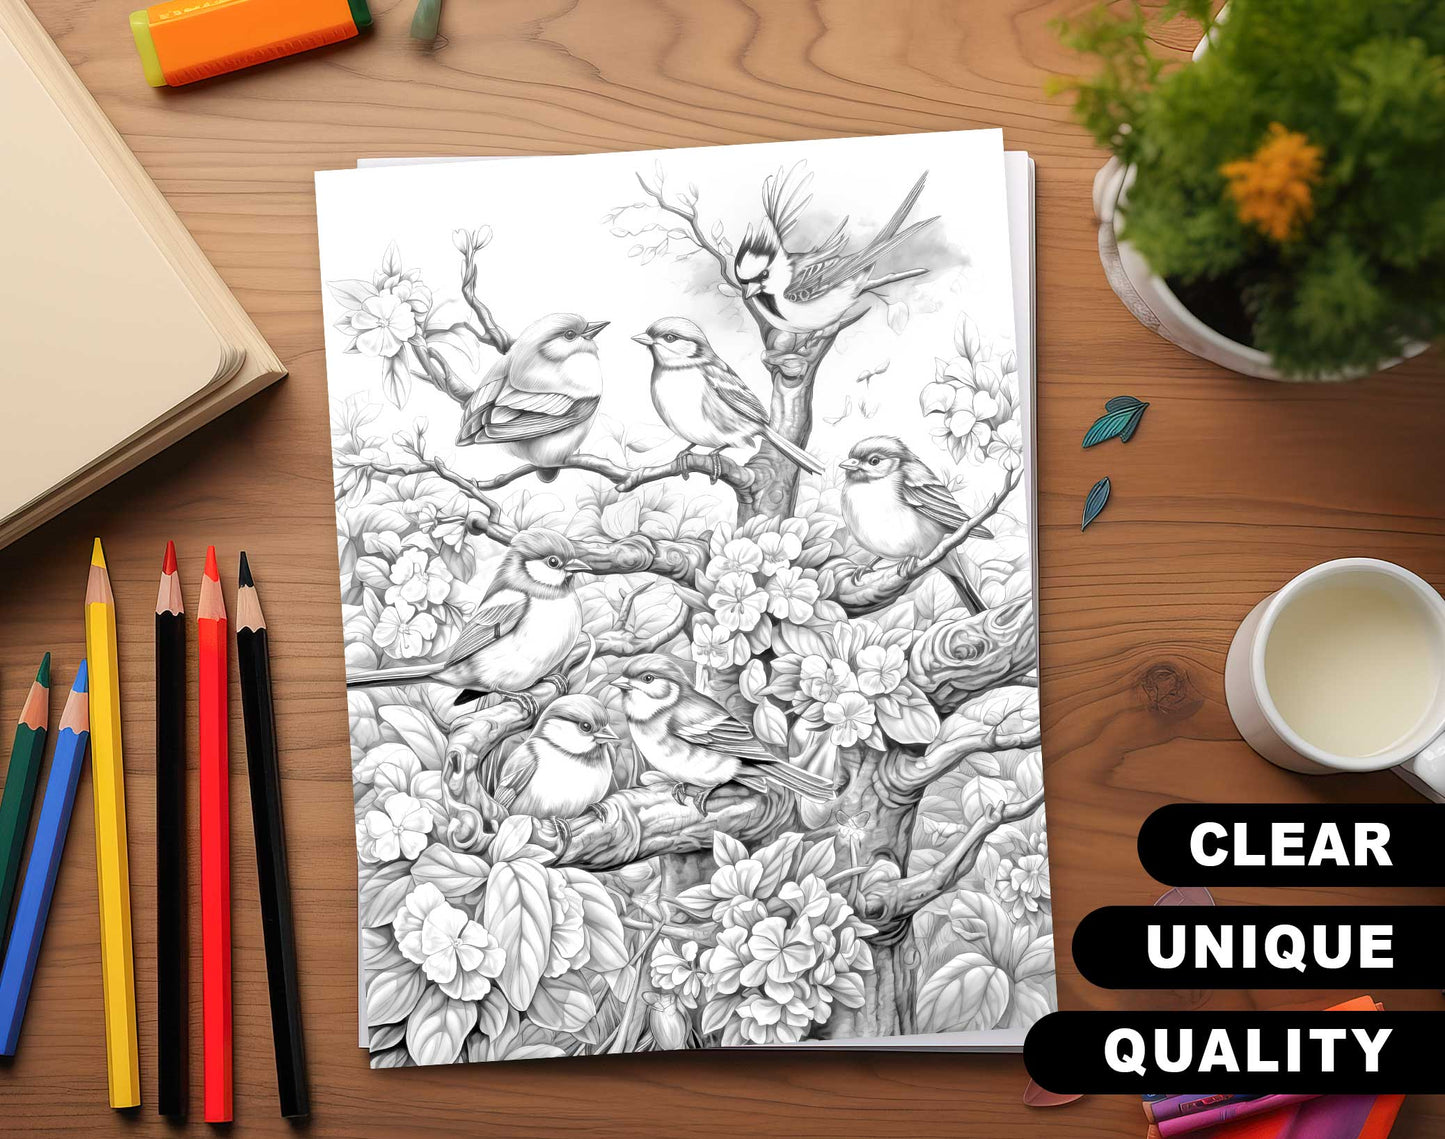 50 Spring Critter Grayscale Coloring Pages - Instant Download - Printable Dark/Light